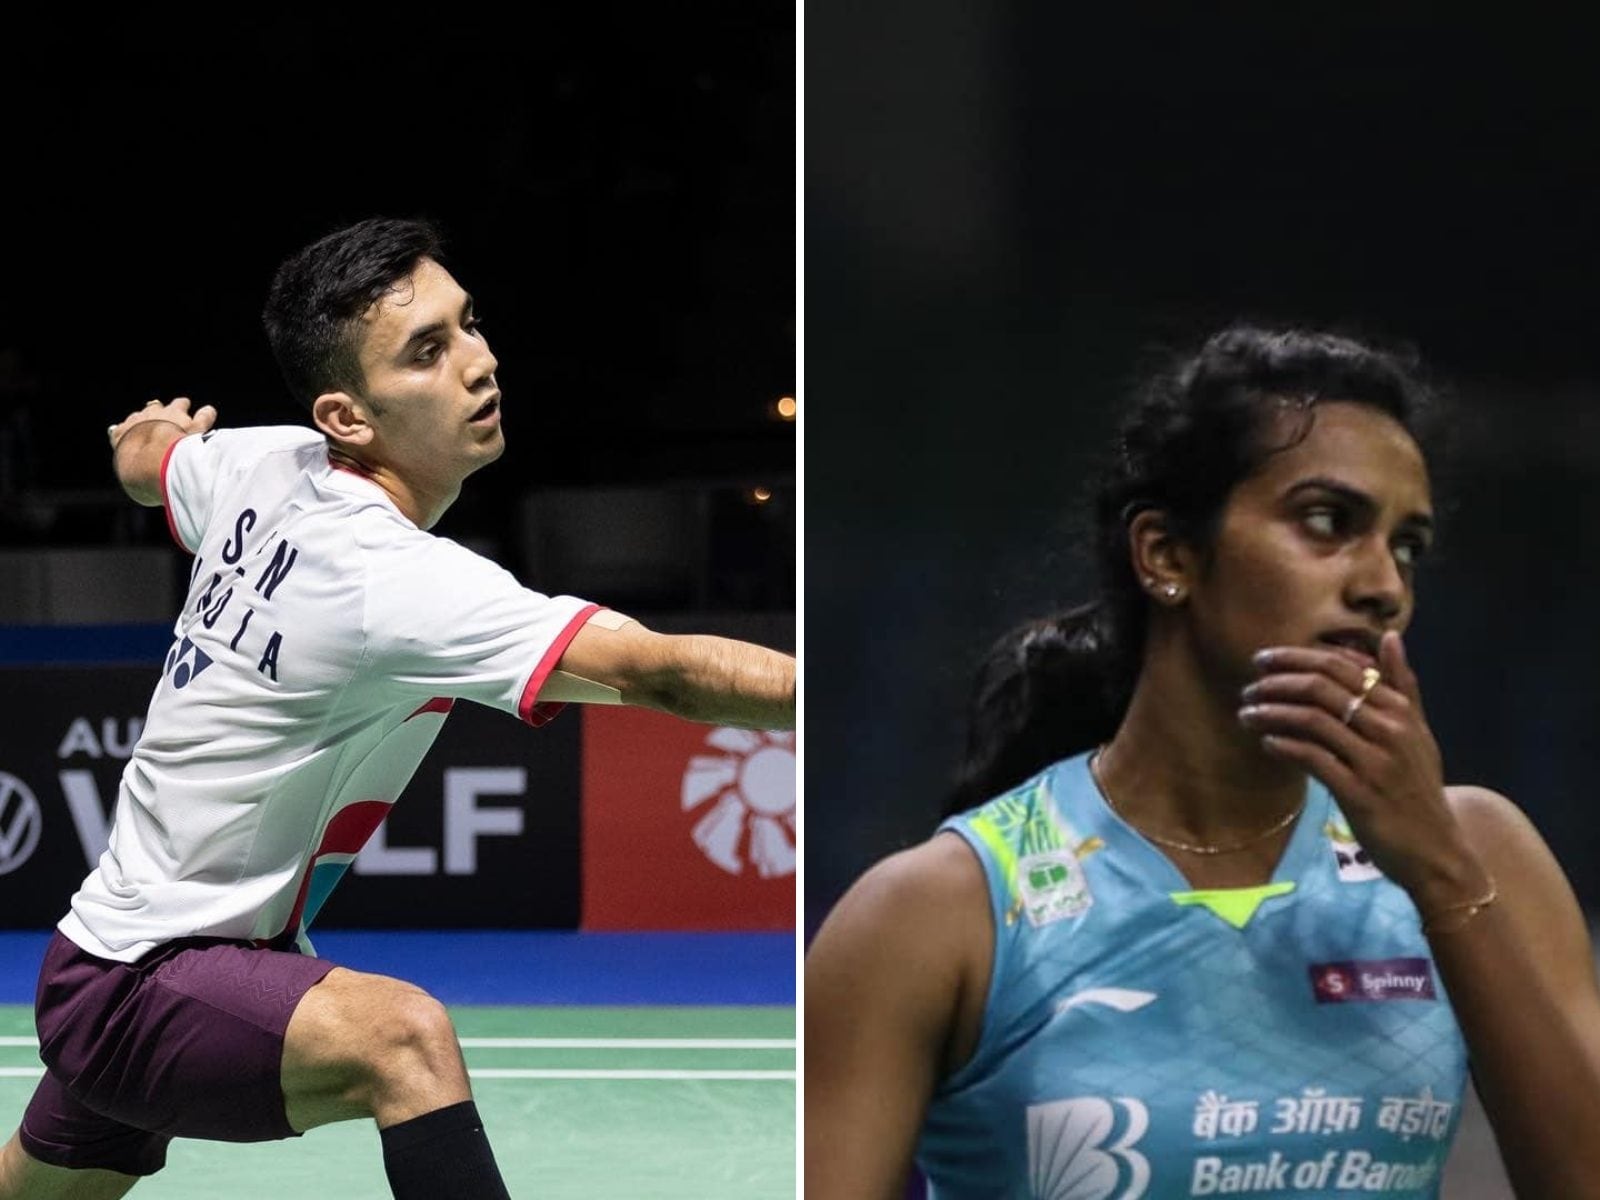 Live Streaming Details For BWF Thomas and Uber Cup Finals 2022